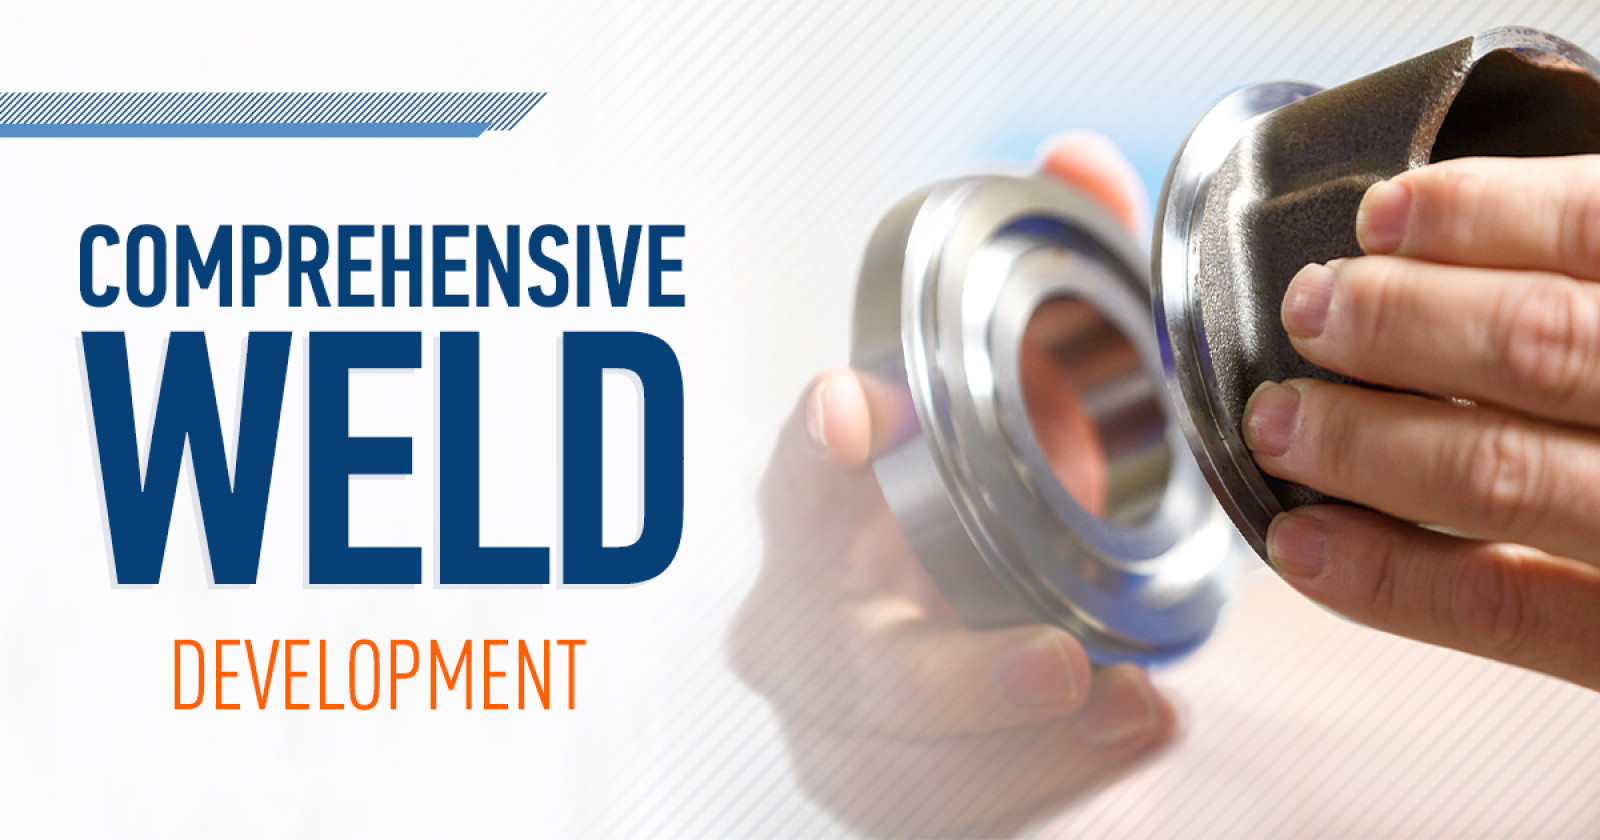 A Step-by-Step Guide to MTI's Weld Development Pro...